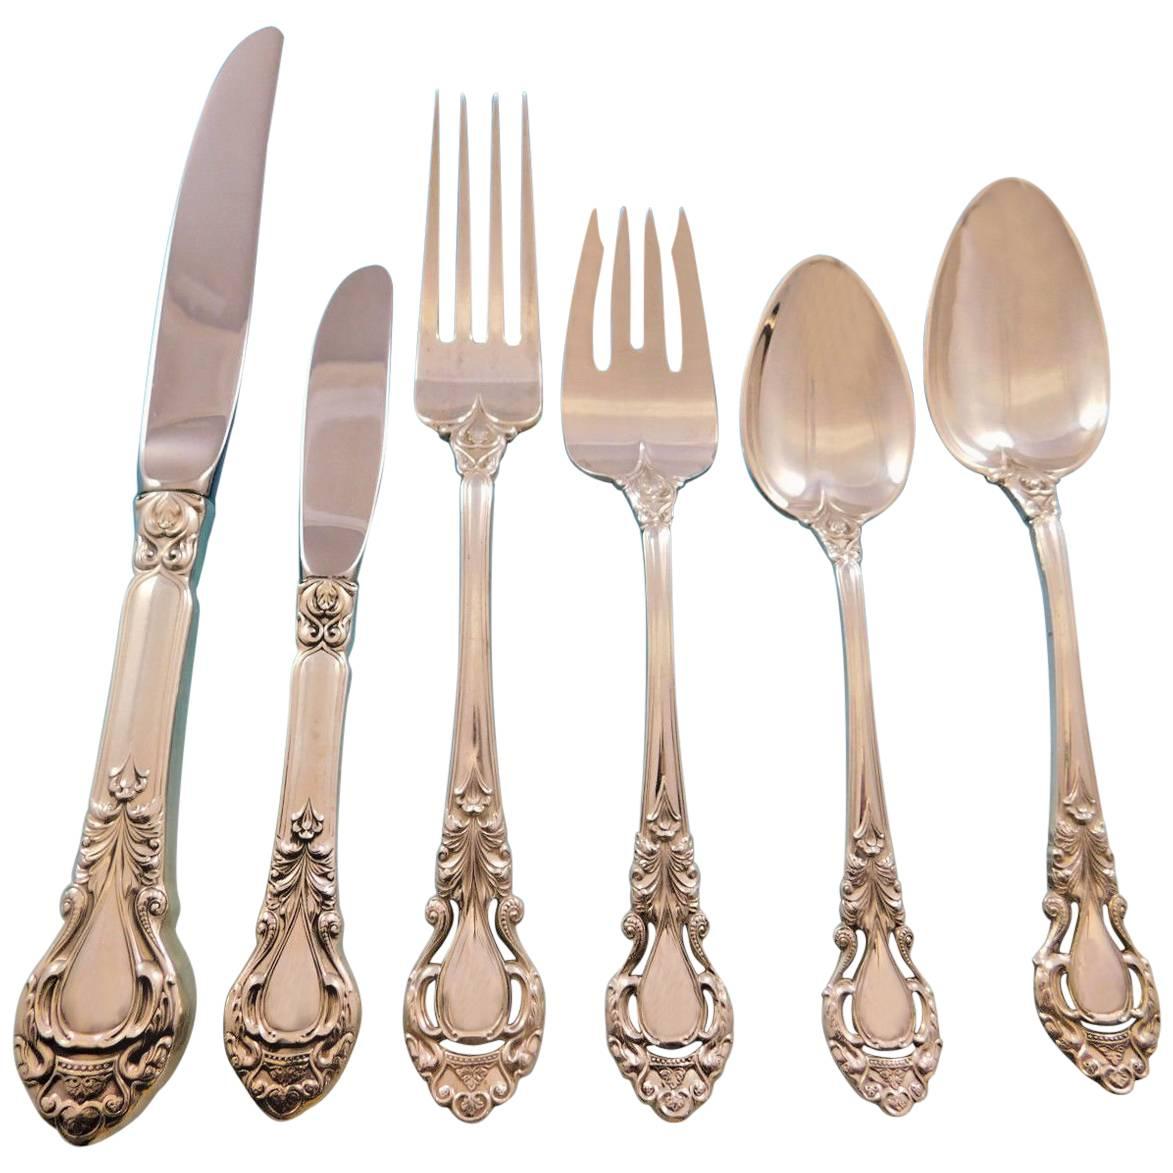 Royal Dynasty by Stieff Sterling Silver Flatware Set for 8 Service 53 pieces For Sale